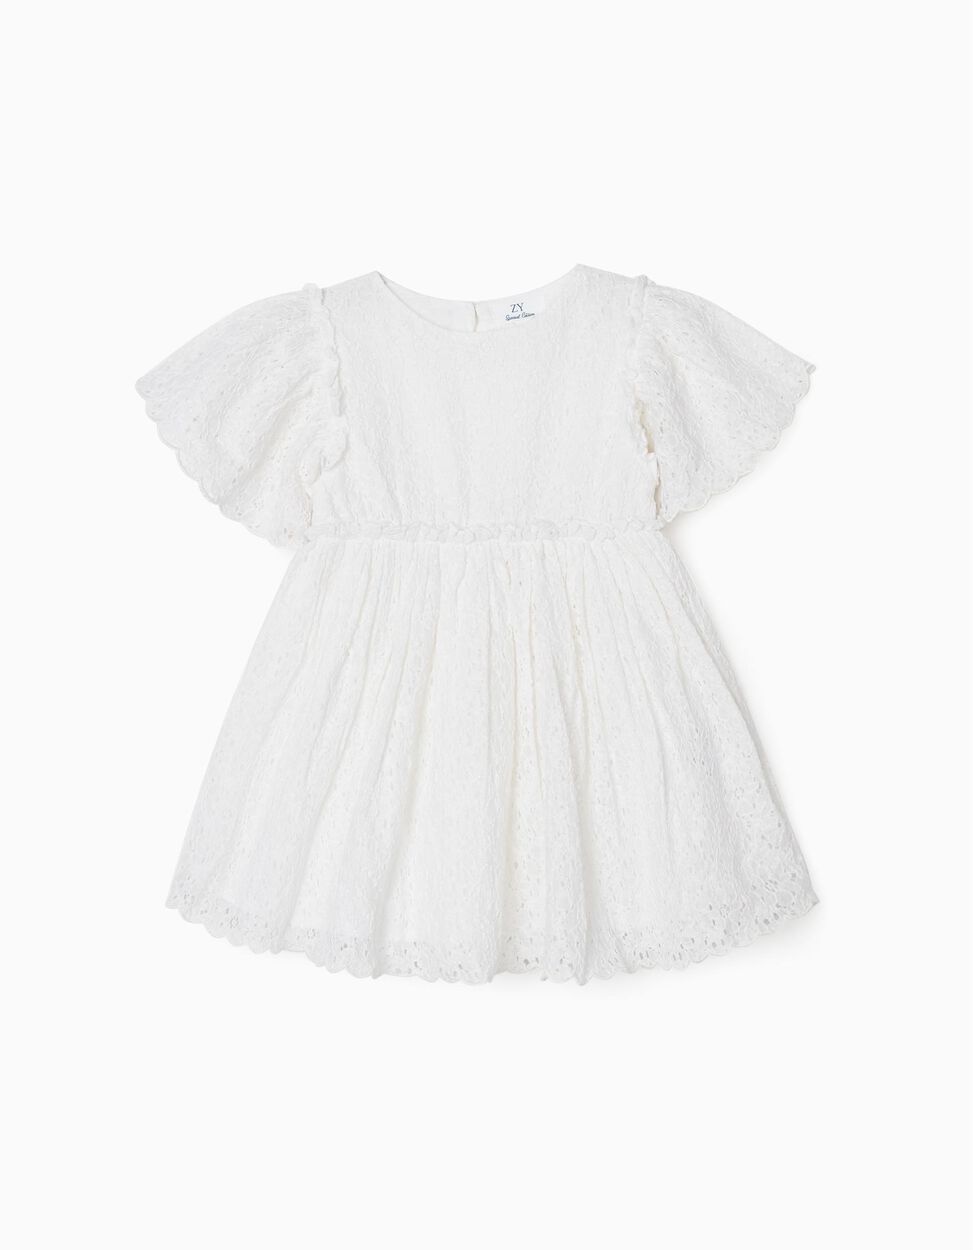 Zippy Lace Dress For Baby Girls, White